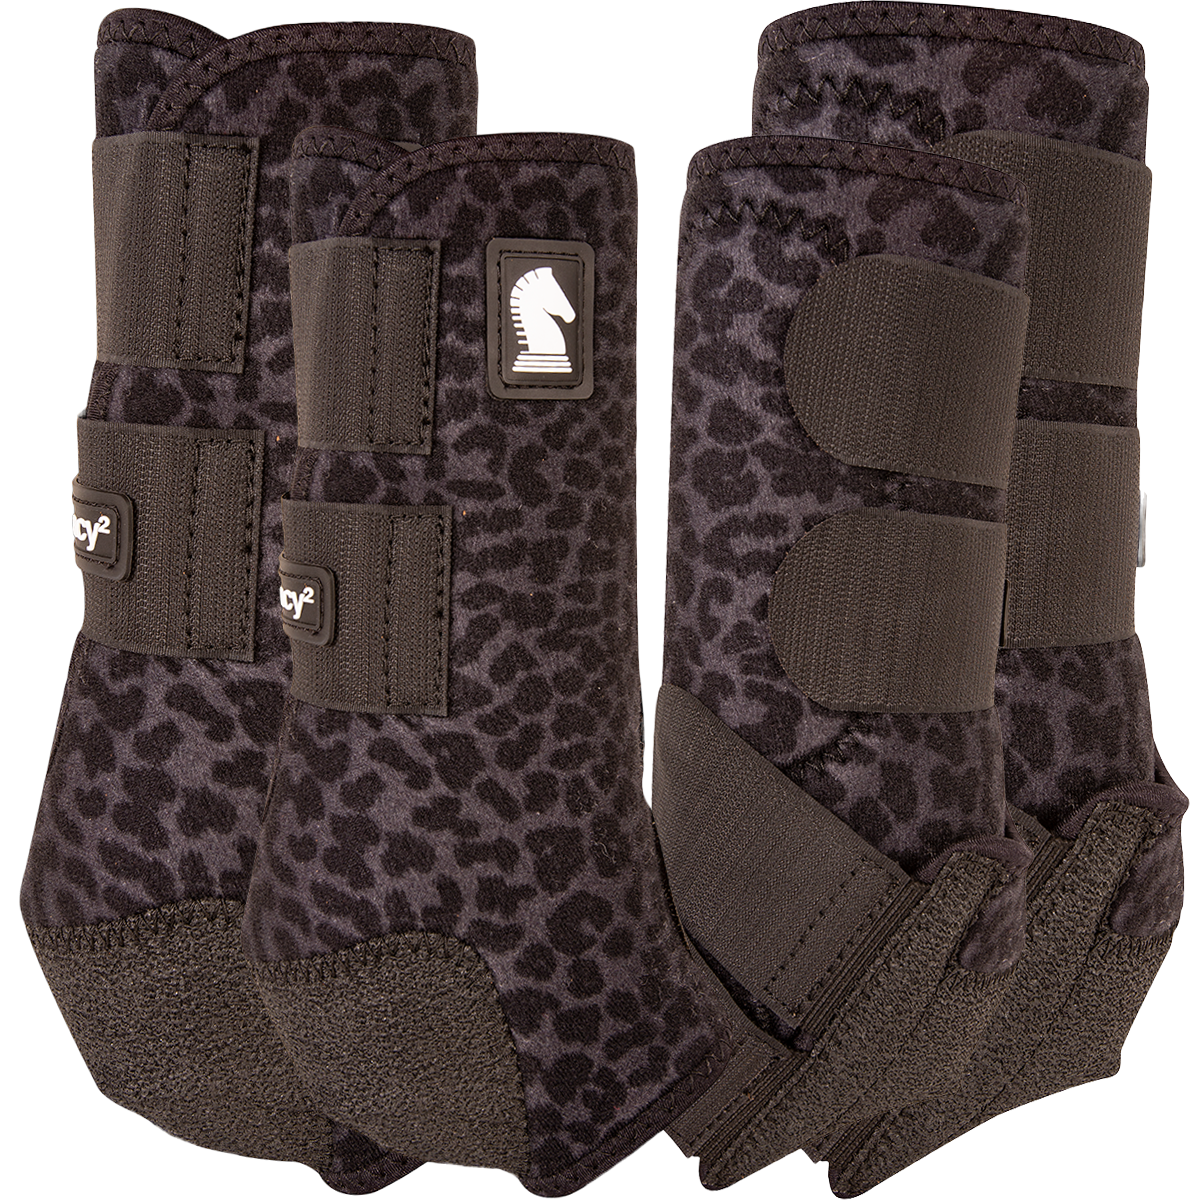 Classic Equine Legacy2 Protective Boot Full Set Black Leopard